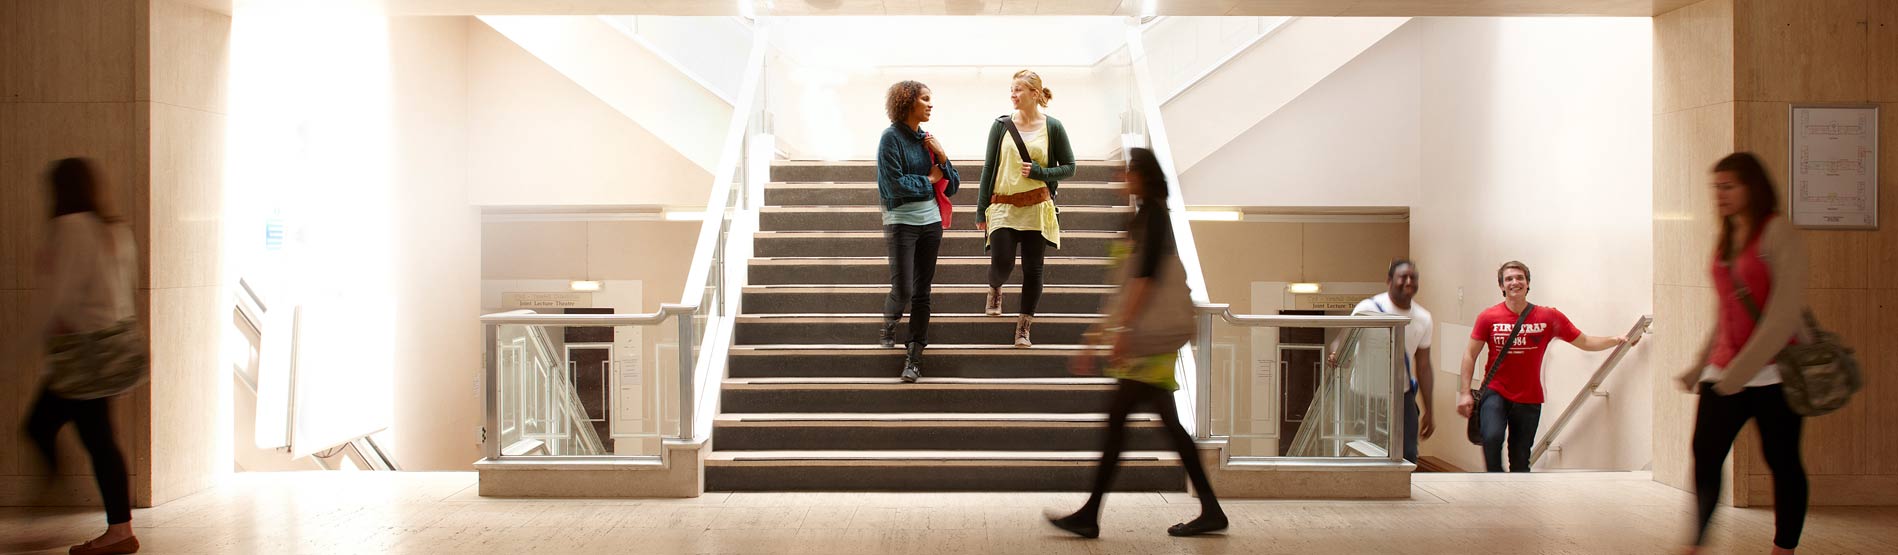 Students in the front foyer of Wallace, walking past and down the staircase.